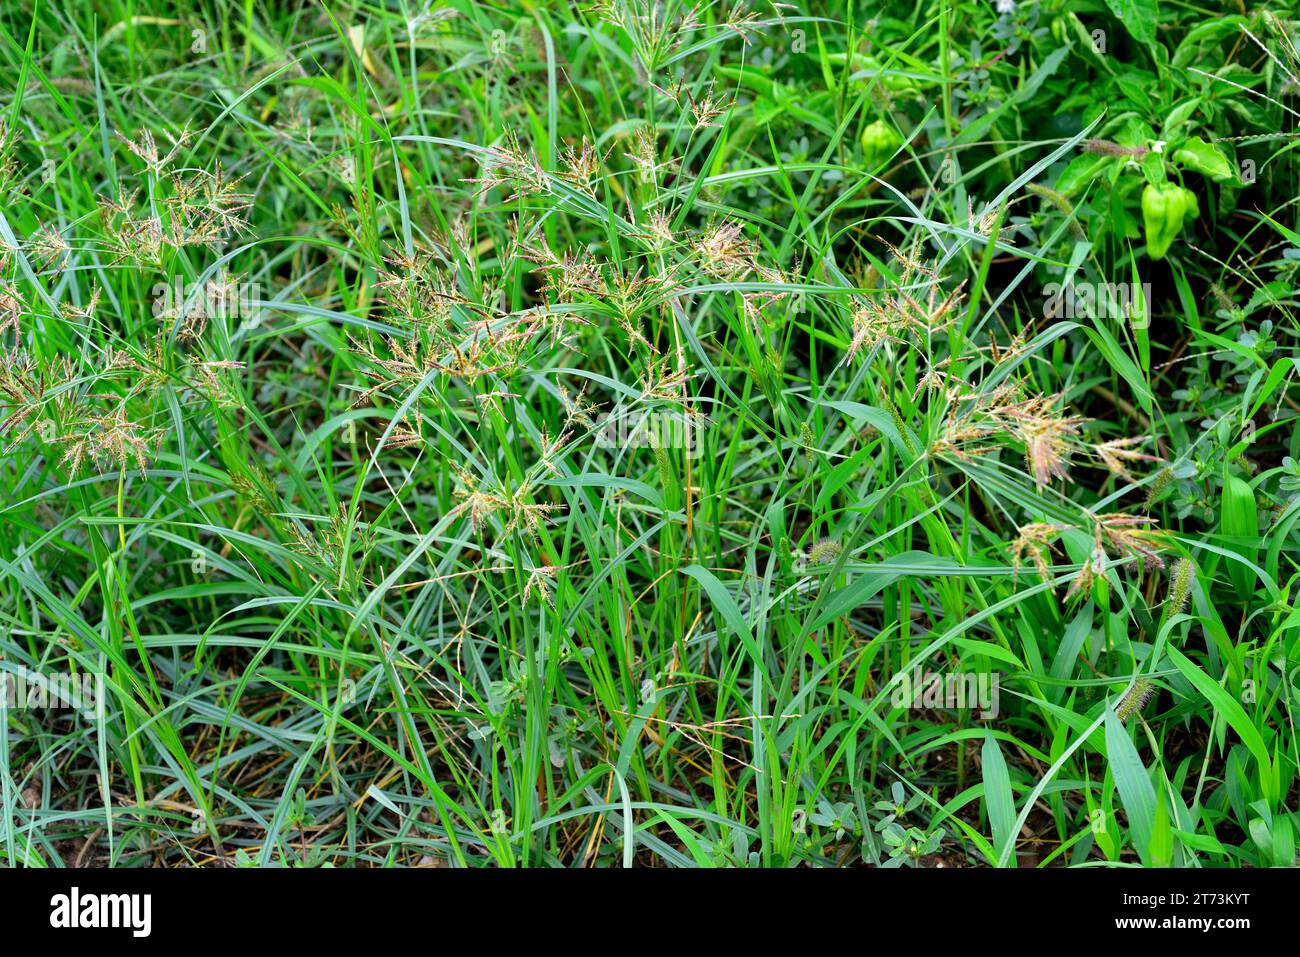 Nut grass (Cyperus rotundus) is a perennial herb native to central and southern Europe, south Asia and Africa and naturalized in all tropical and temp Stock Photo